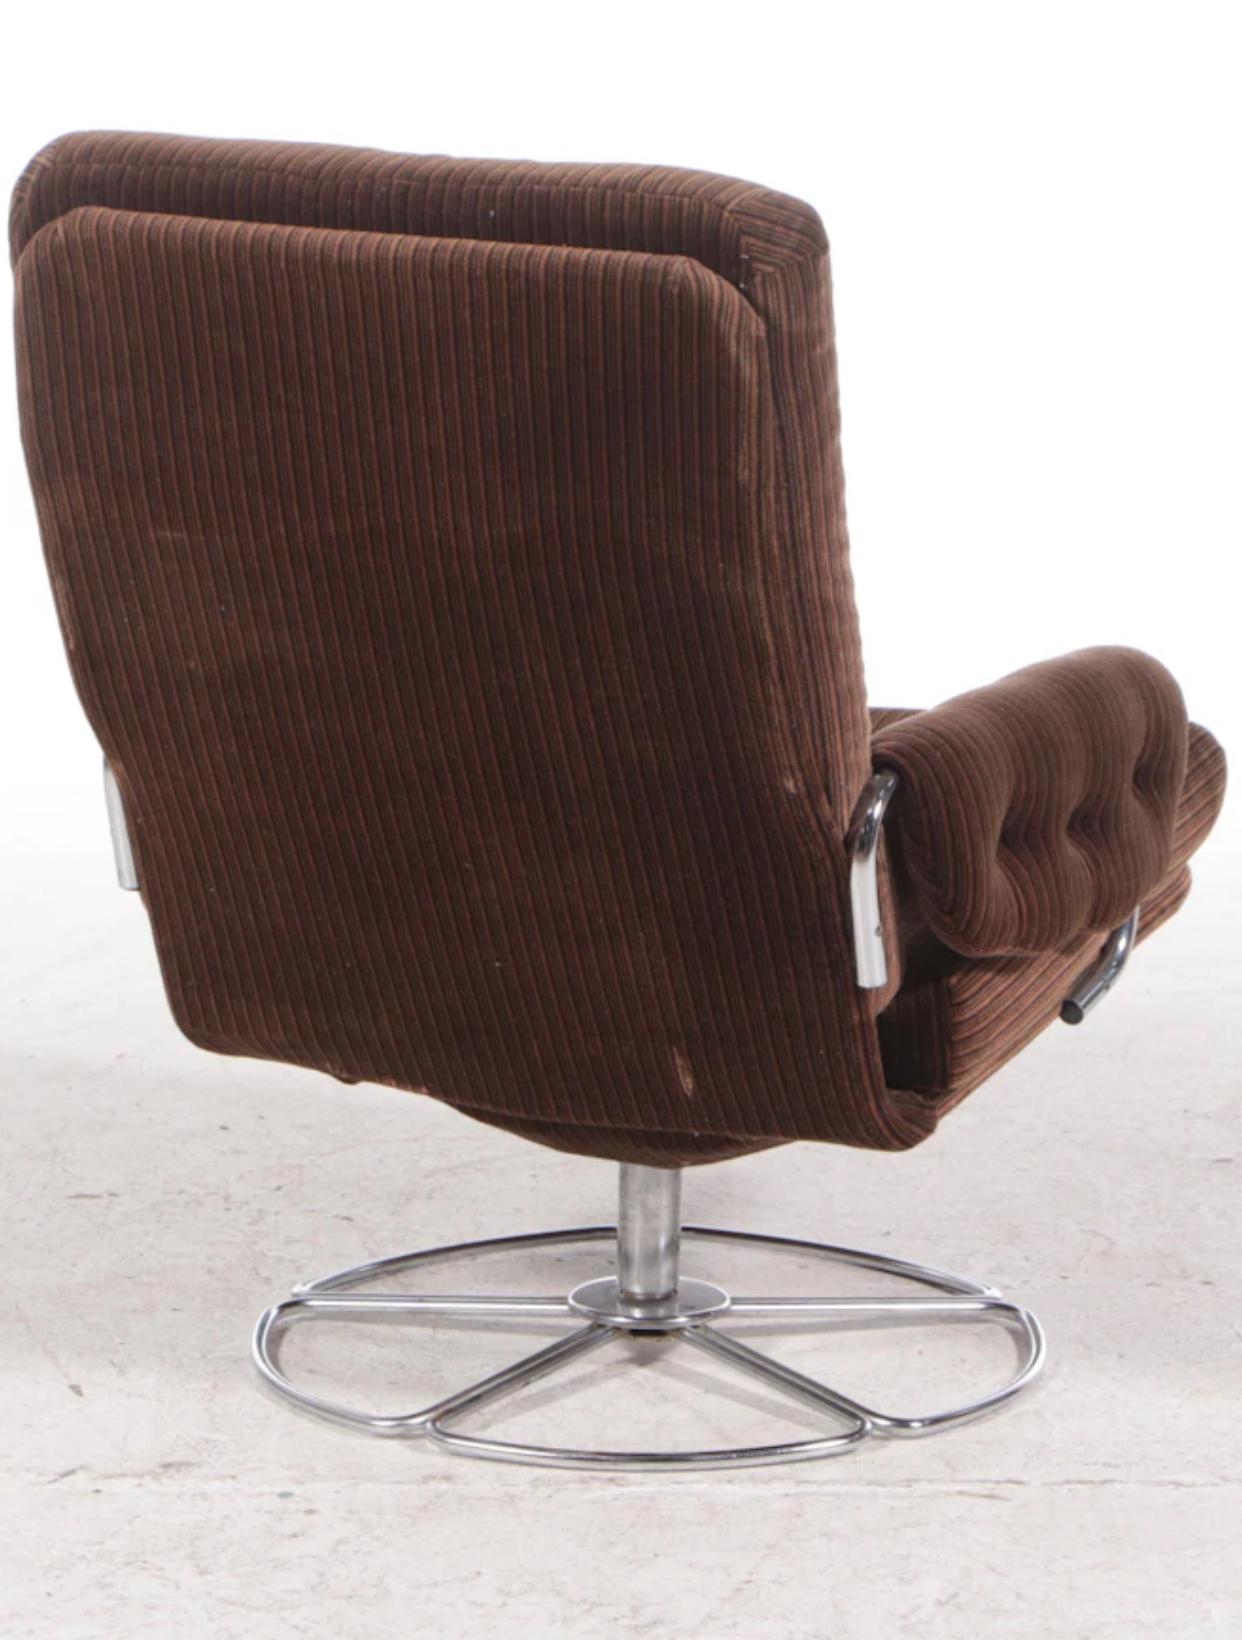 Mid-20th Century Bruno Mathsson for Dux Chrome Based Swivel Lounge Chair. 1 of 2 For Sale